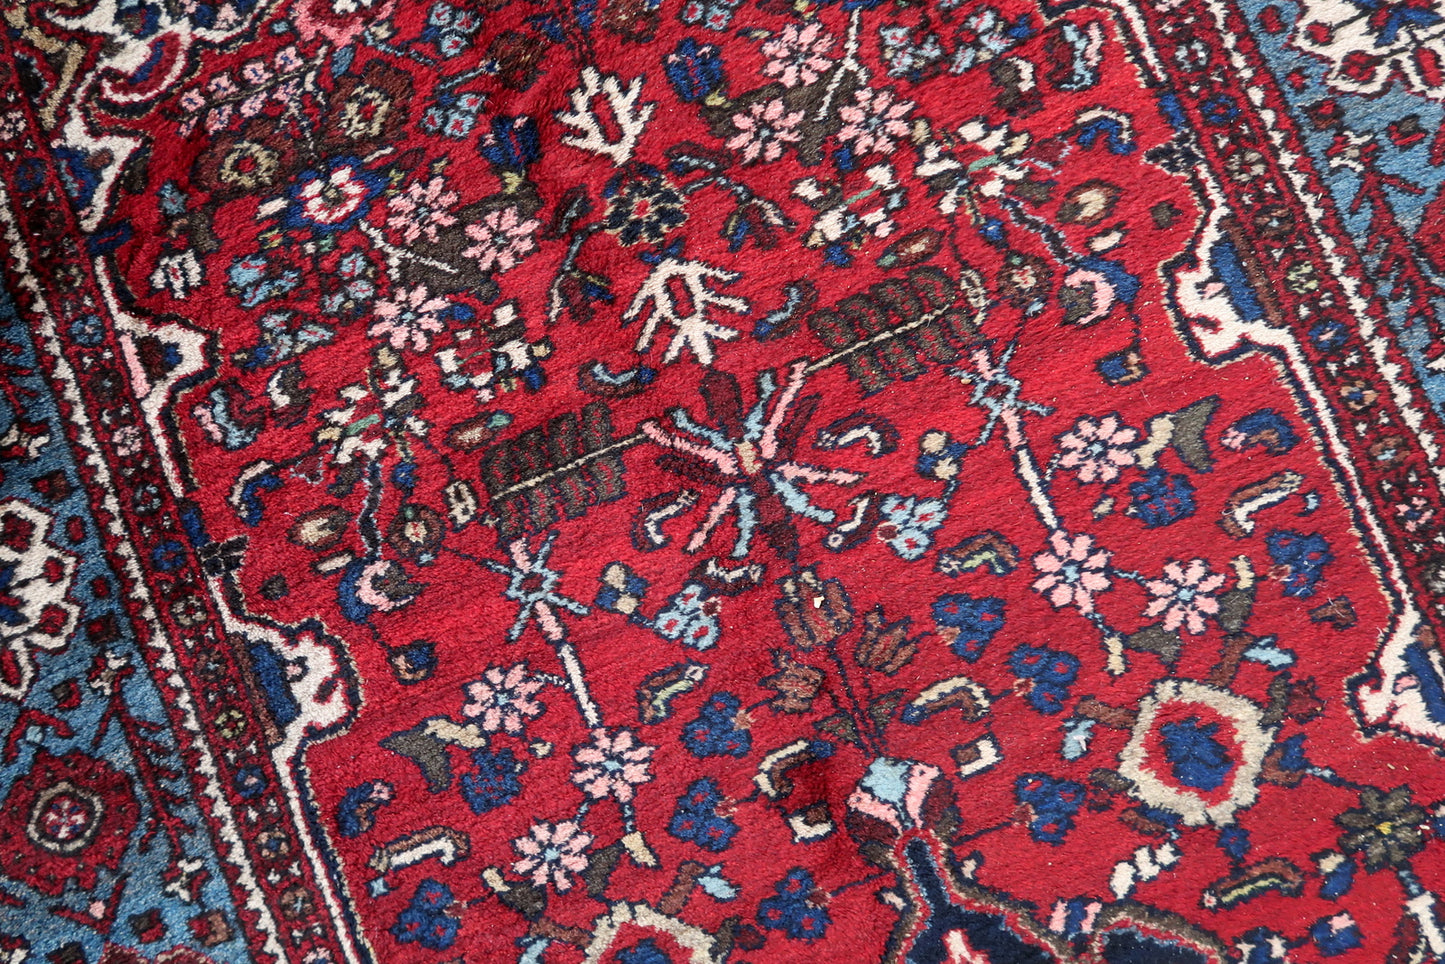 Close-up of good condition on Handmade Vintage Persian Malayer Rug - Detailed view emphasizing the rug's well-preserved state.